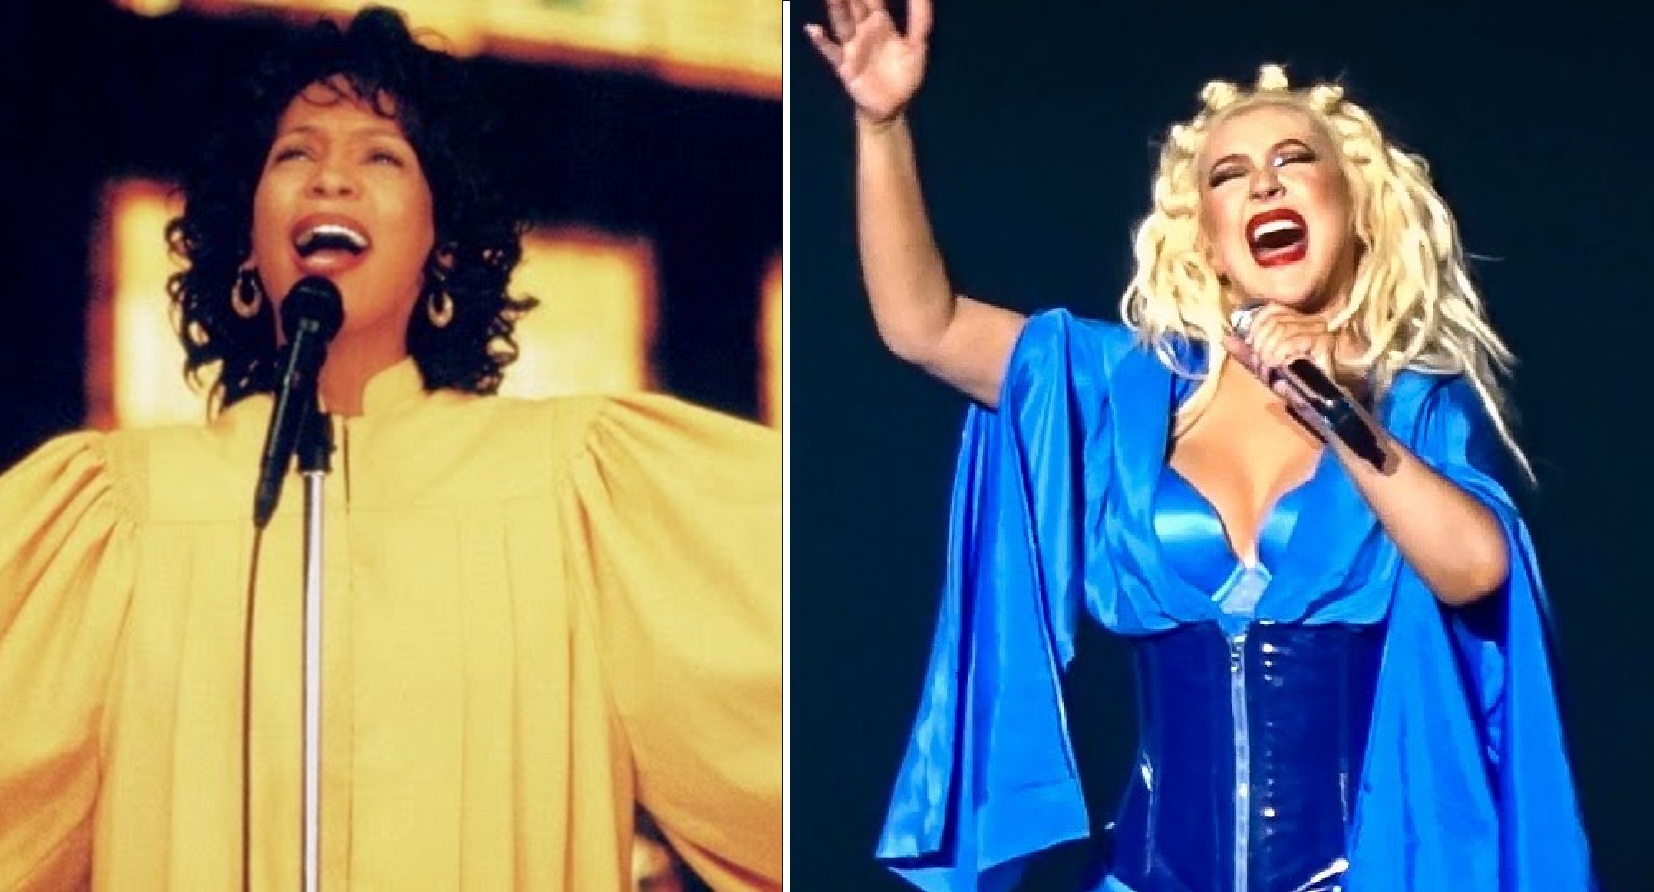 Christina Aguilera Covers Whitney Houston’s I Love The Lord During Vegas Residency